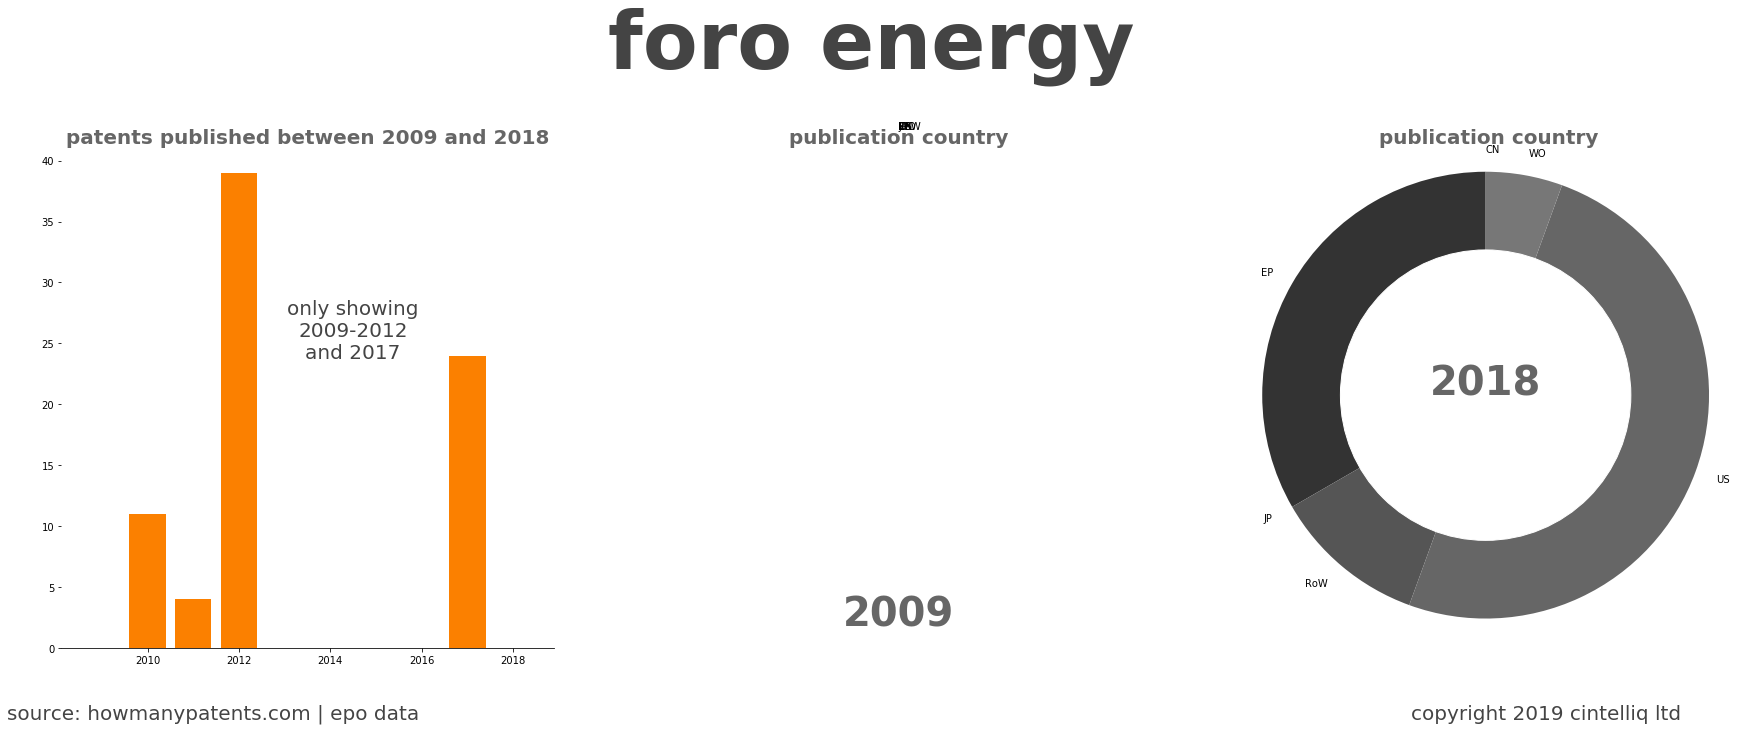 summary of patents for Foro Energy